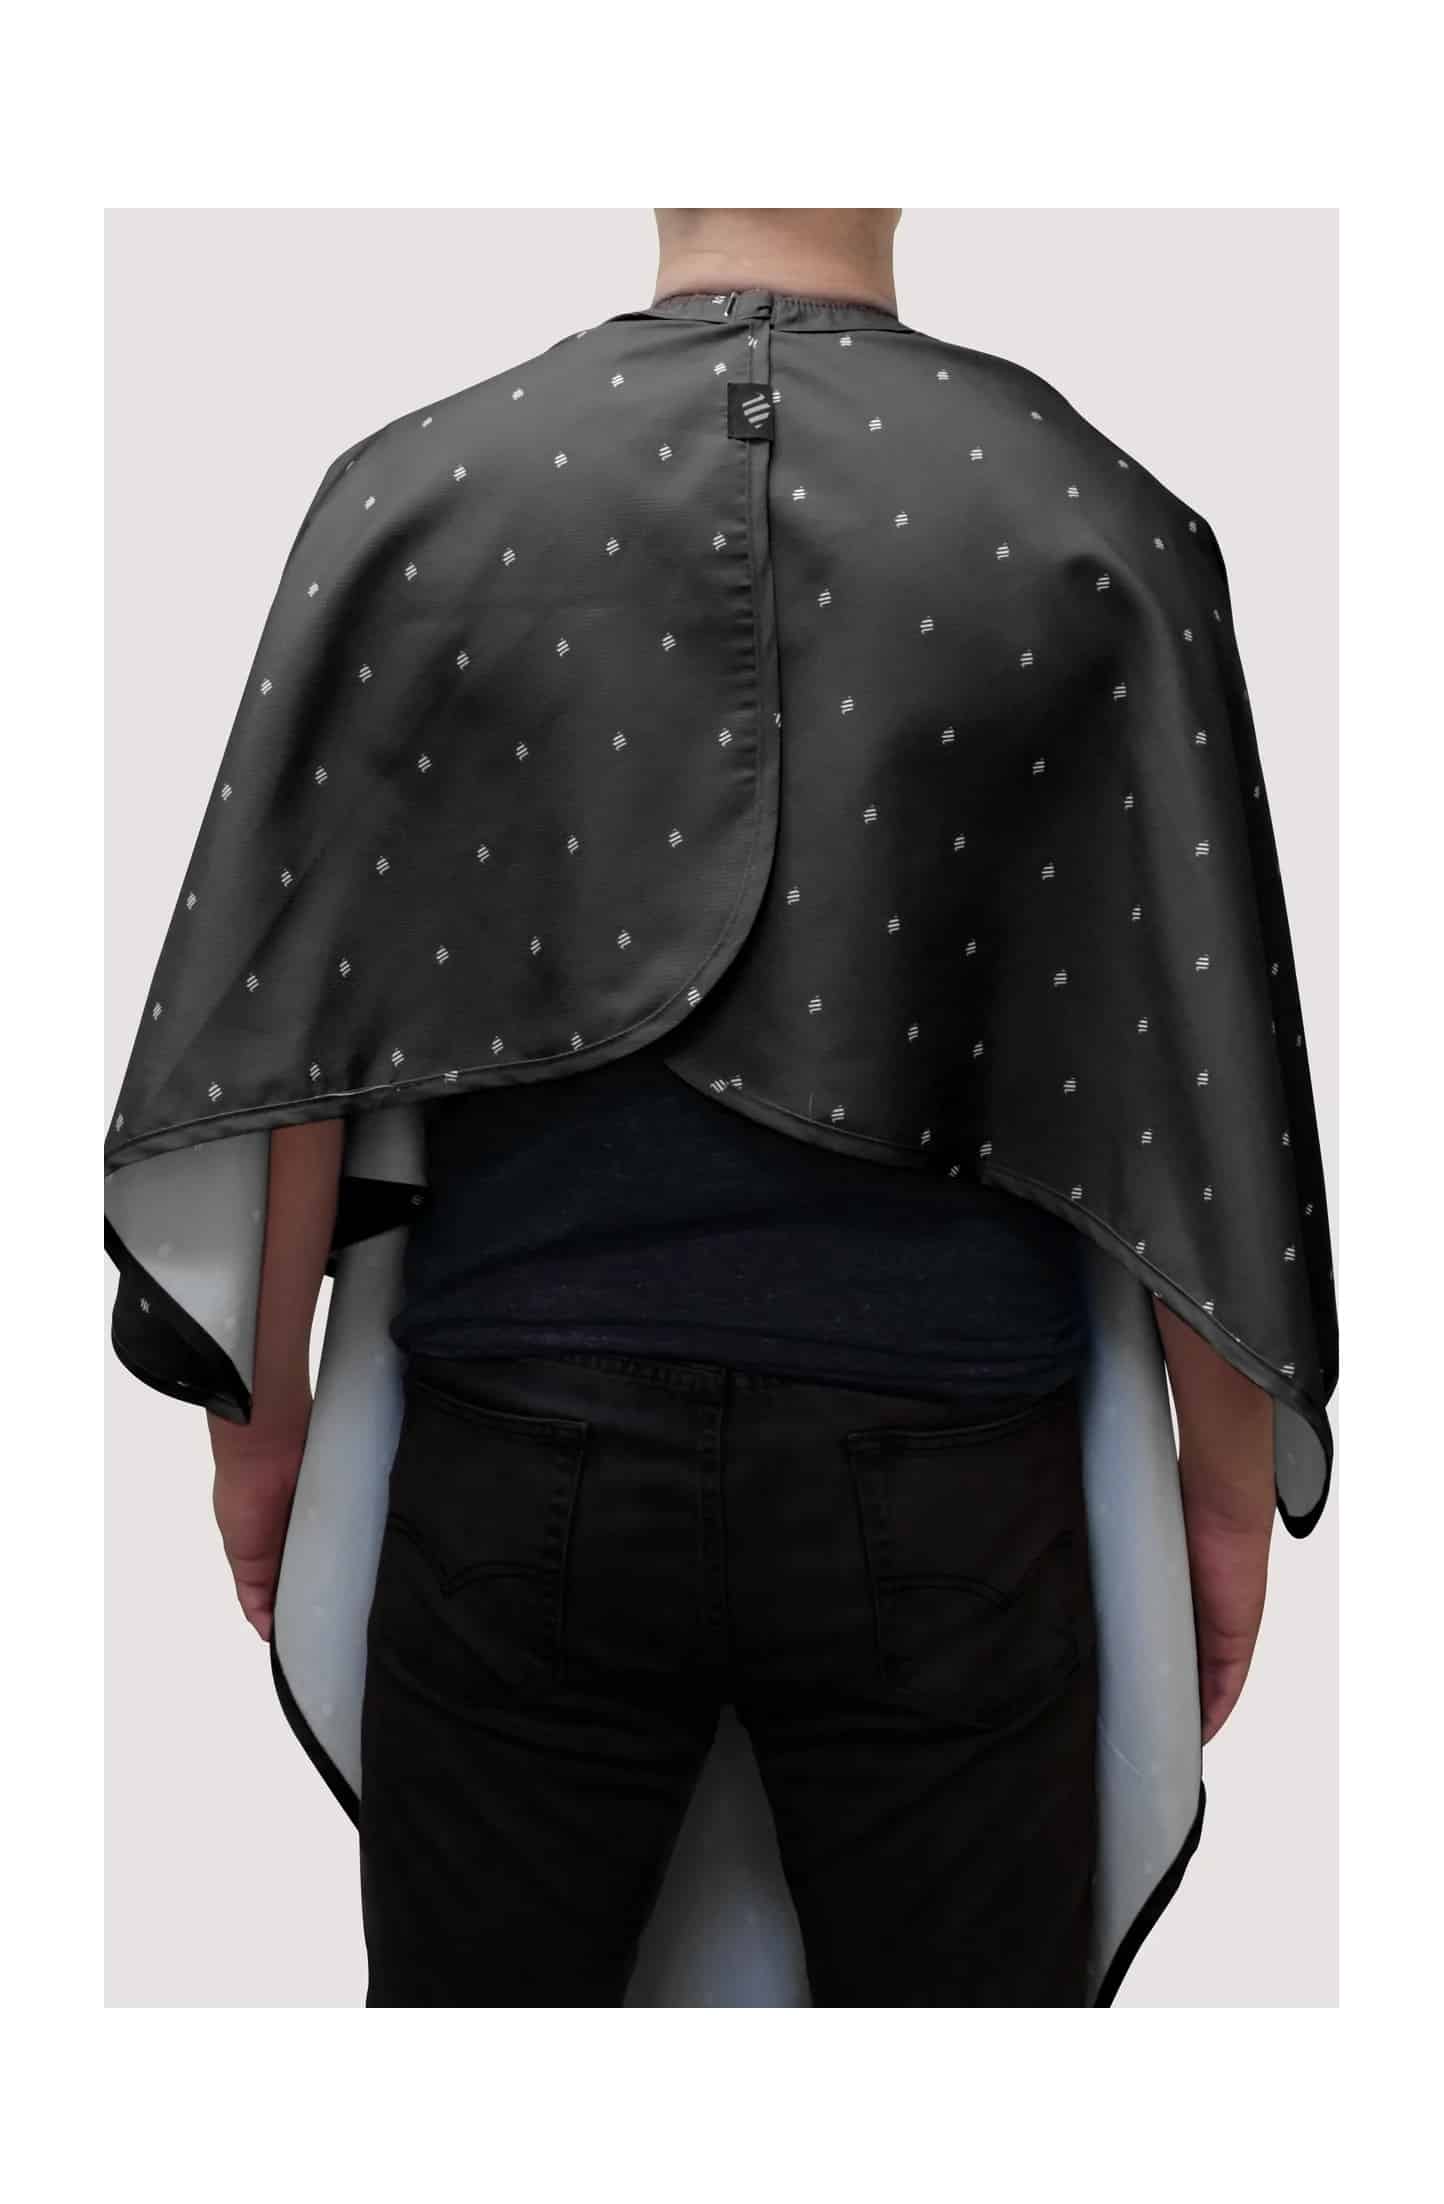  Barber Strong The Barber Cape Haircut Cover for Men, Hair  Repelling and Static-Reducing Material, Water Resistant Fabric : Beauty 